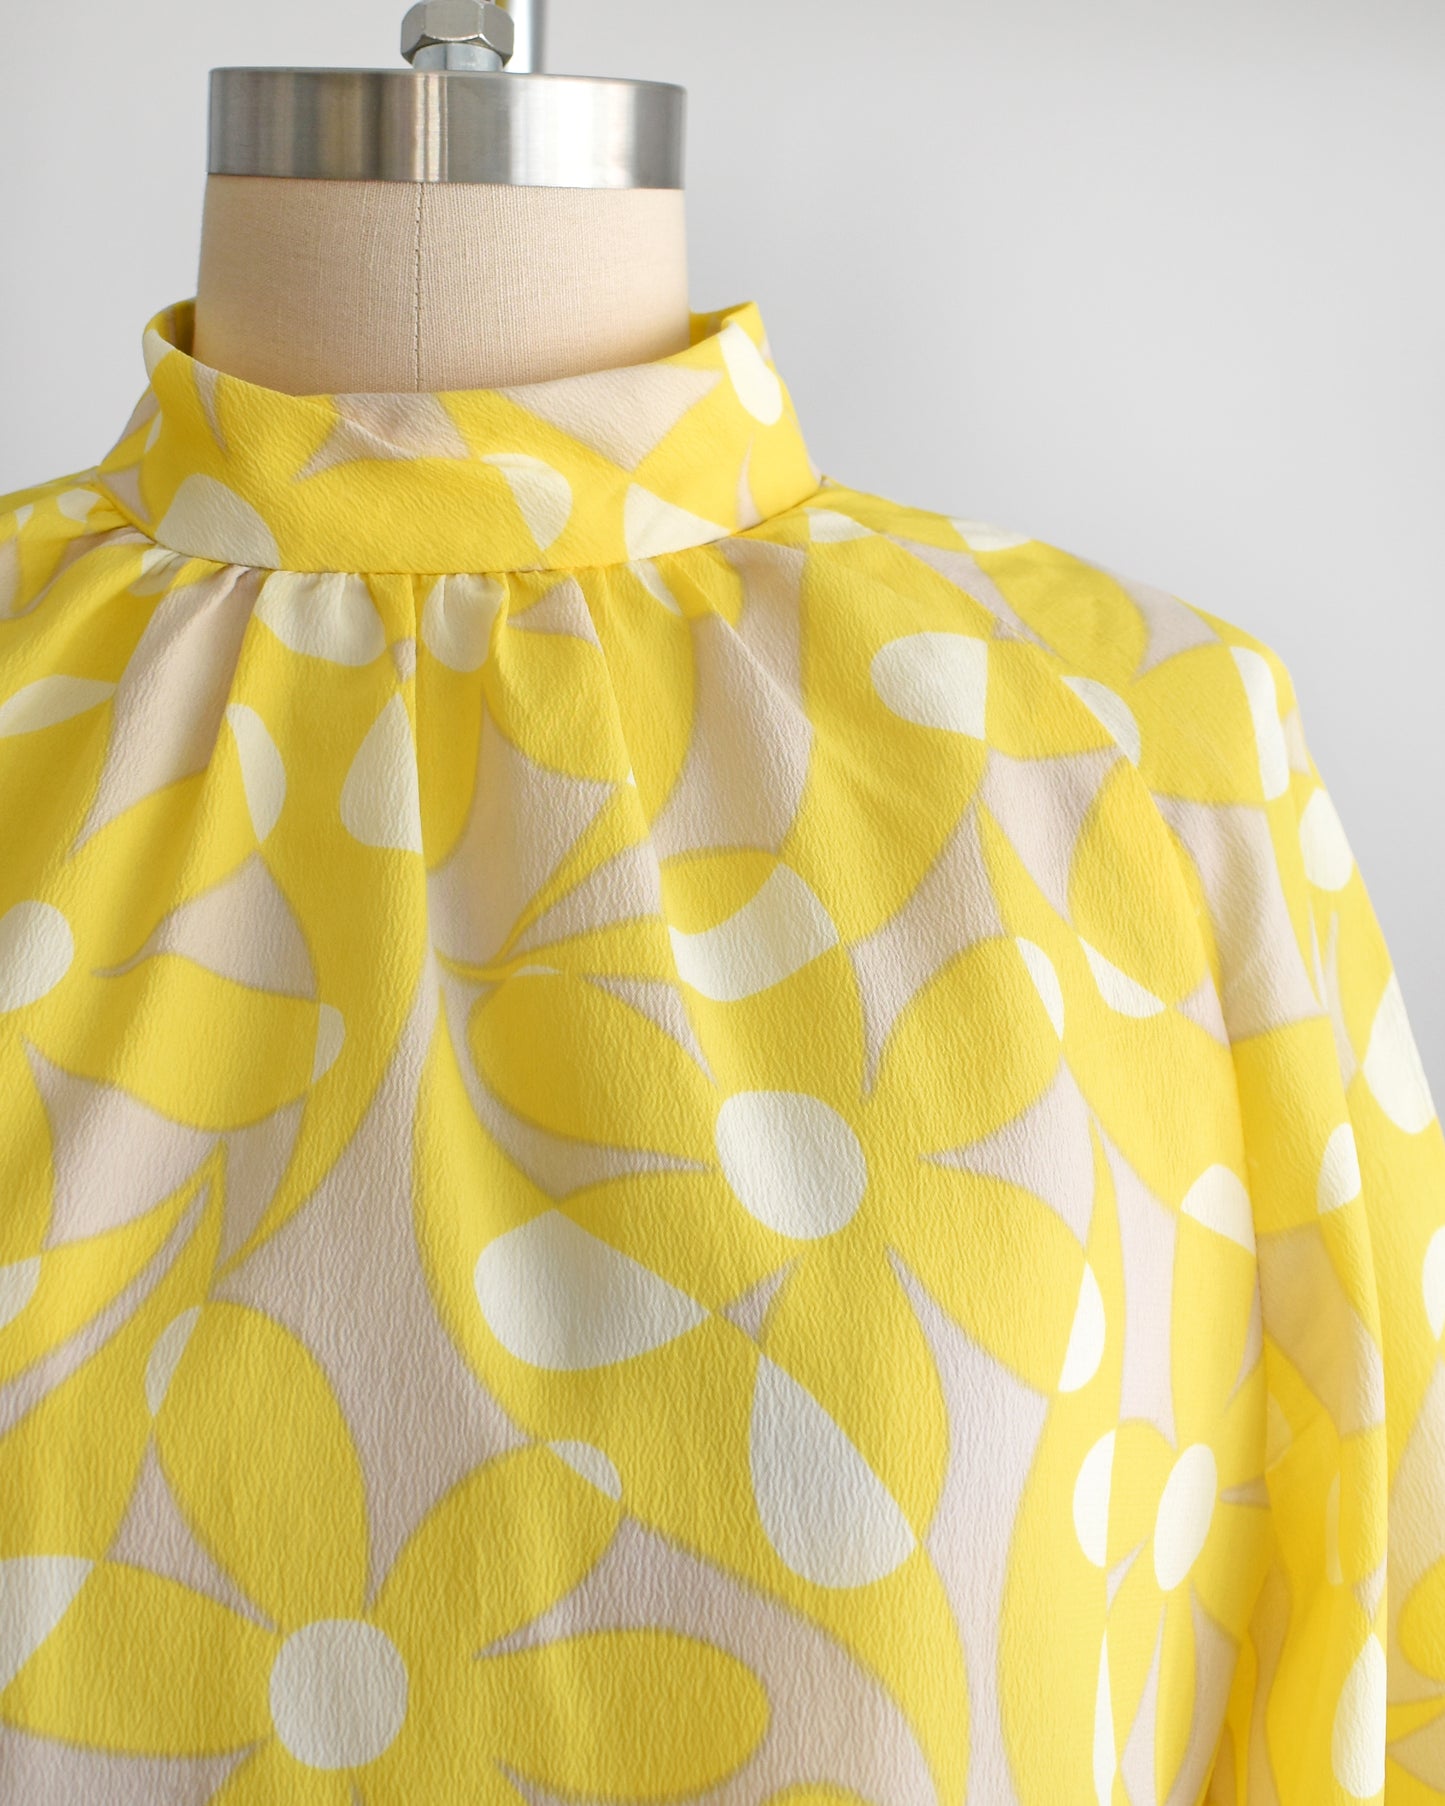 Close up of the mockneck collar and yellow floral print